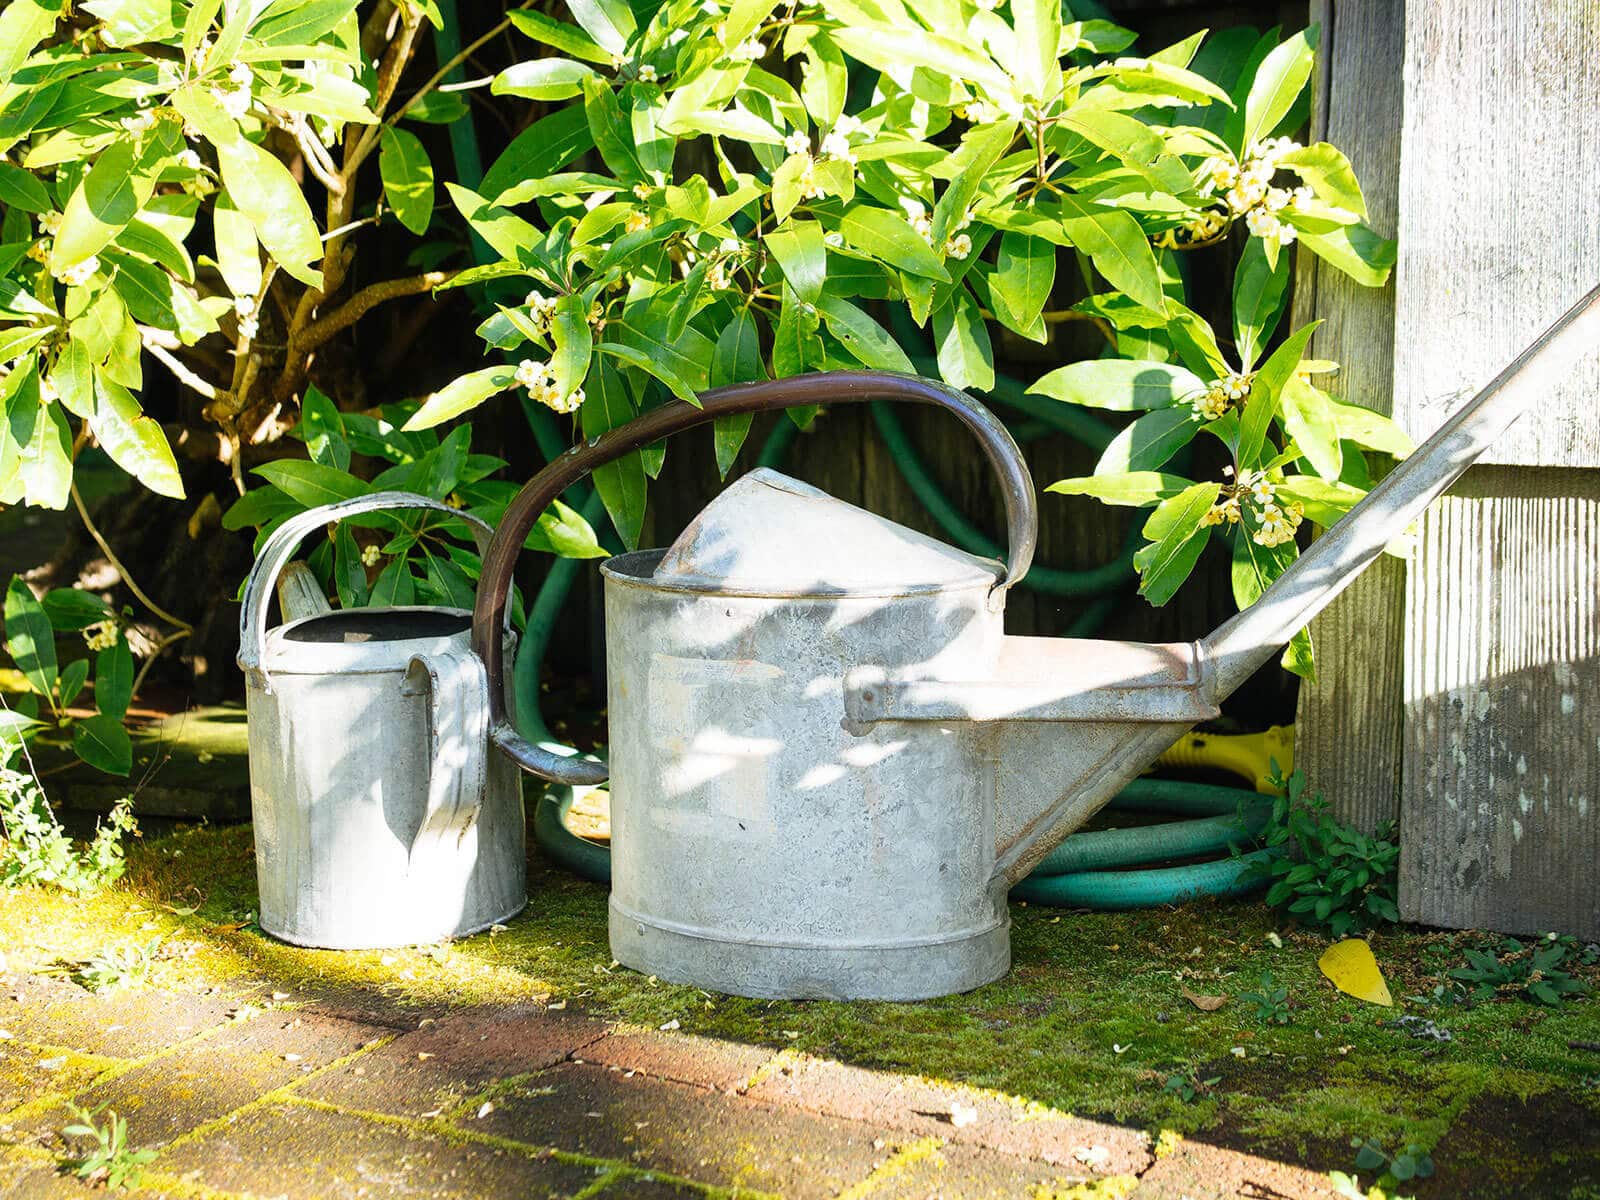 Galvanized metal watering cans on the ground in a sunny garden